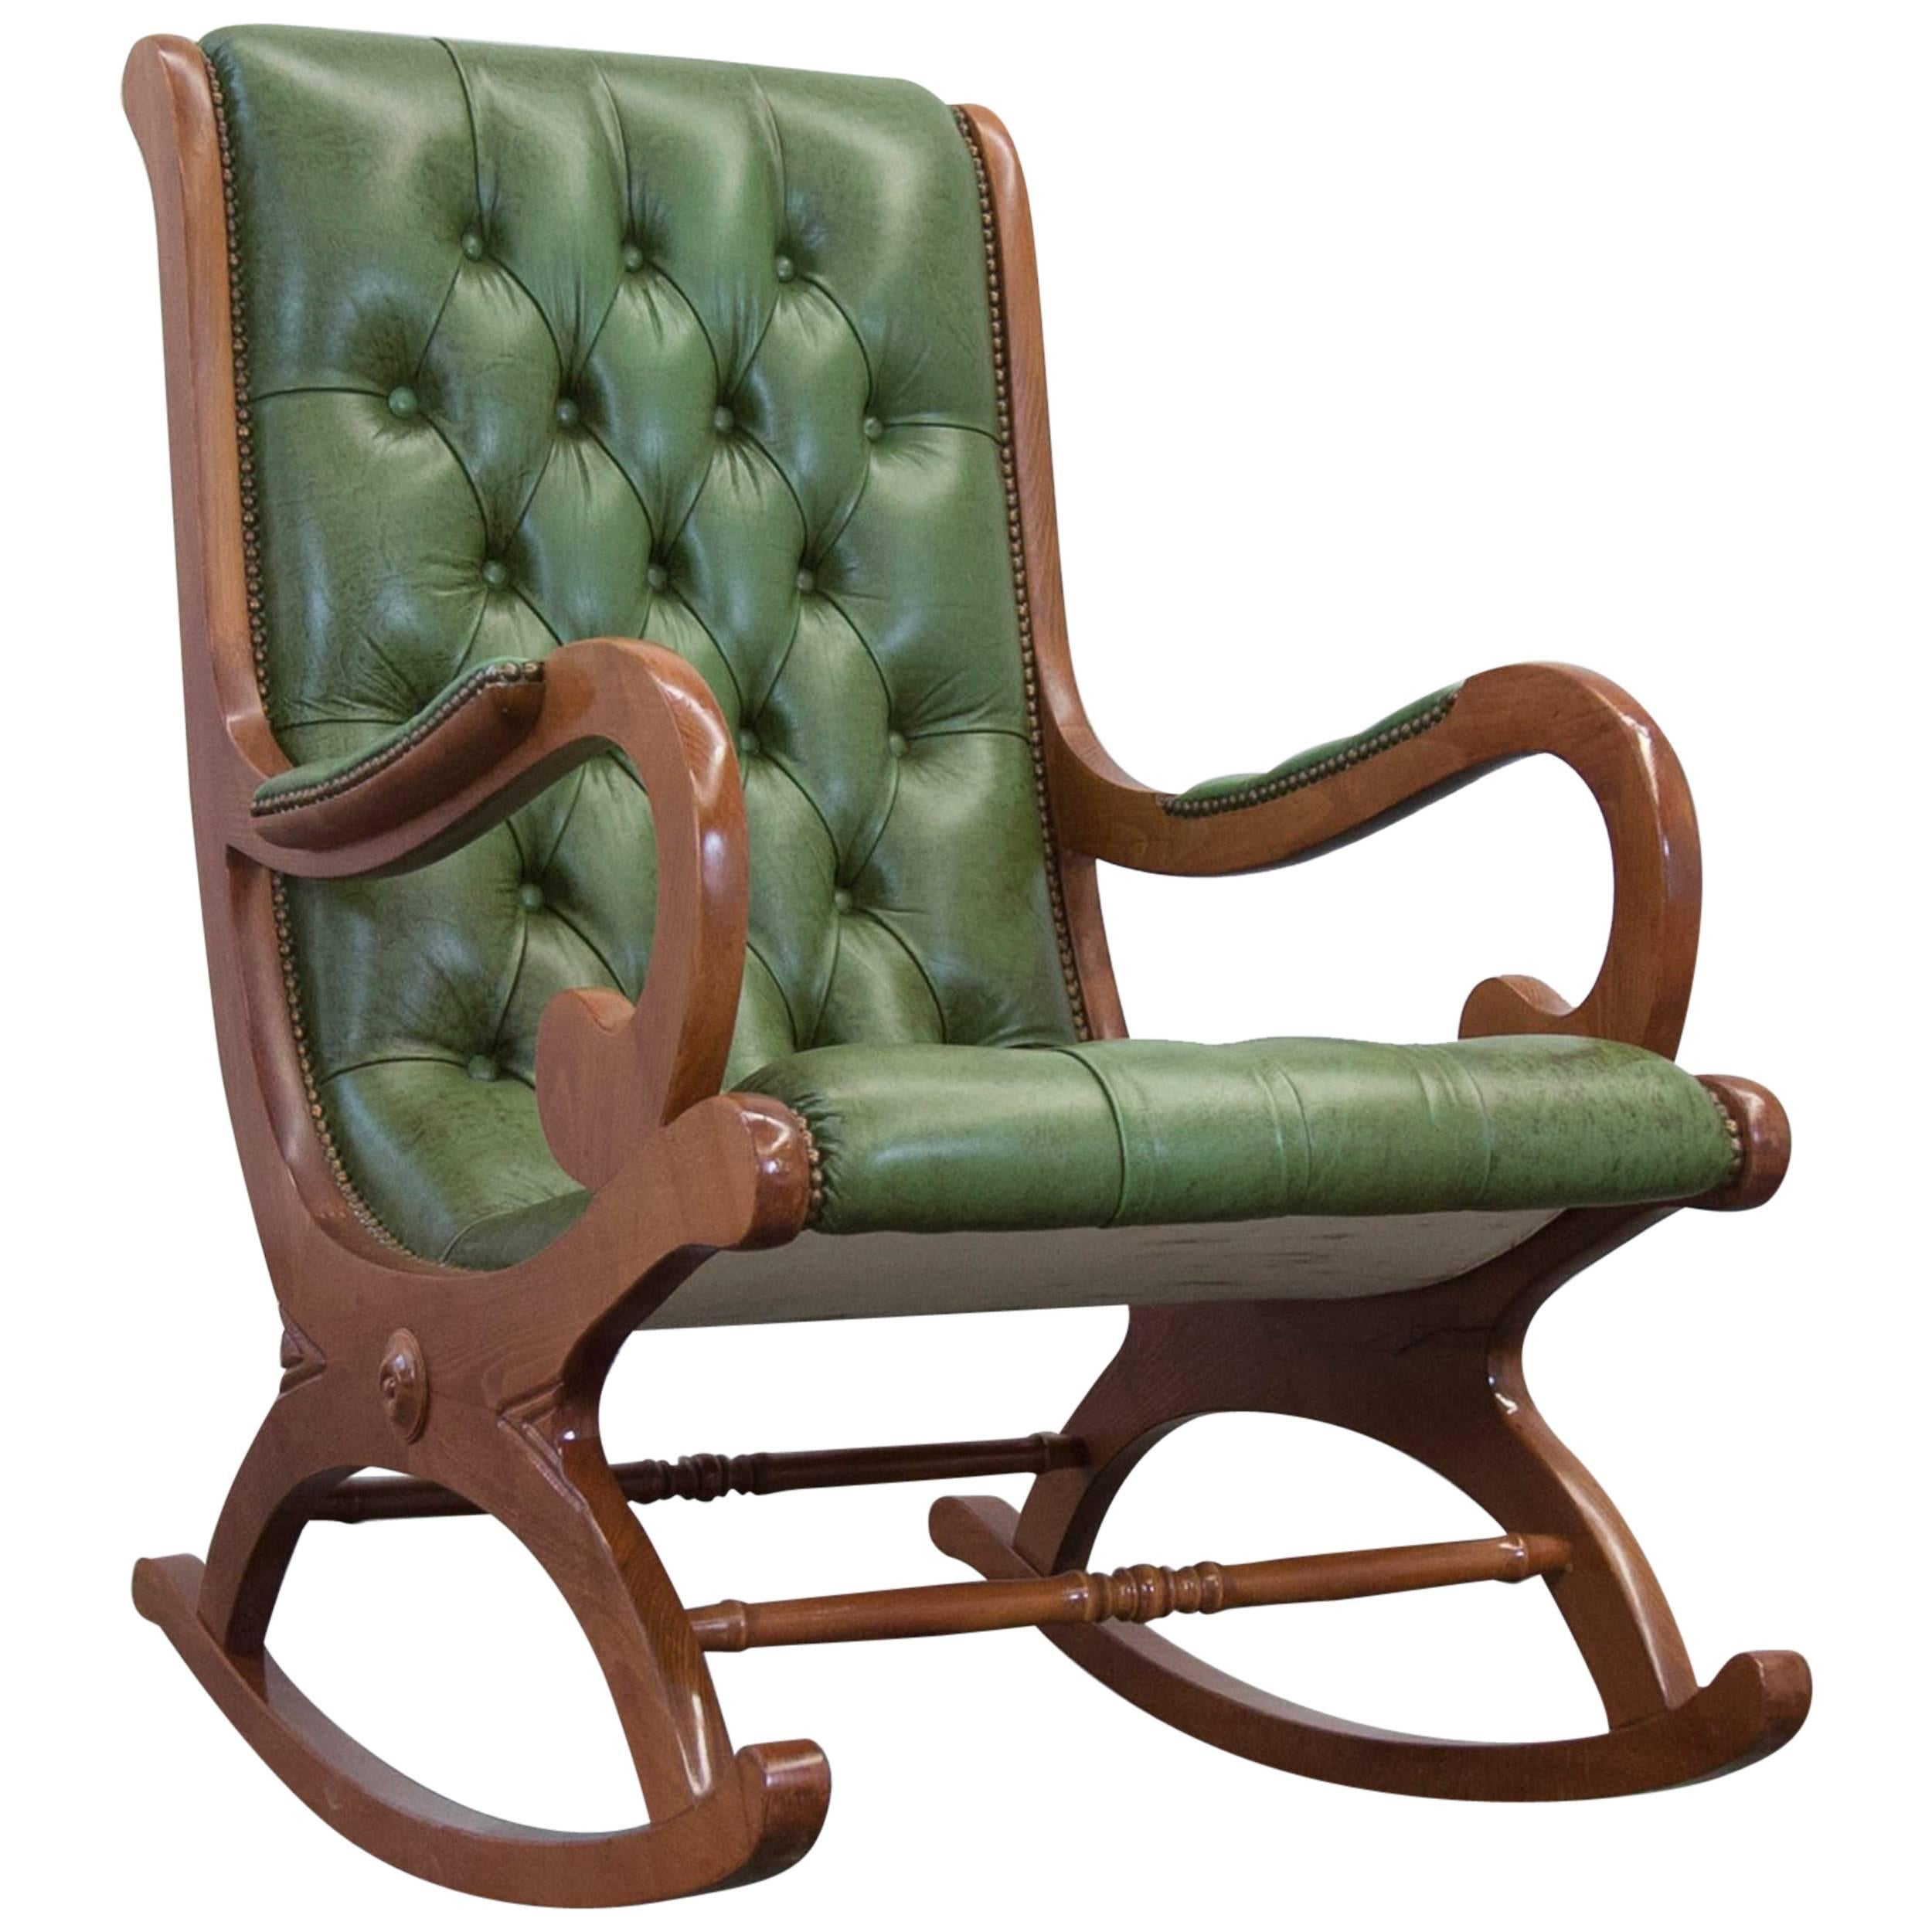 Vintage Chesterfield Rocking Chair in Green Leather